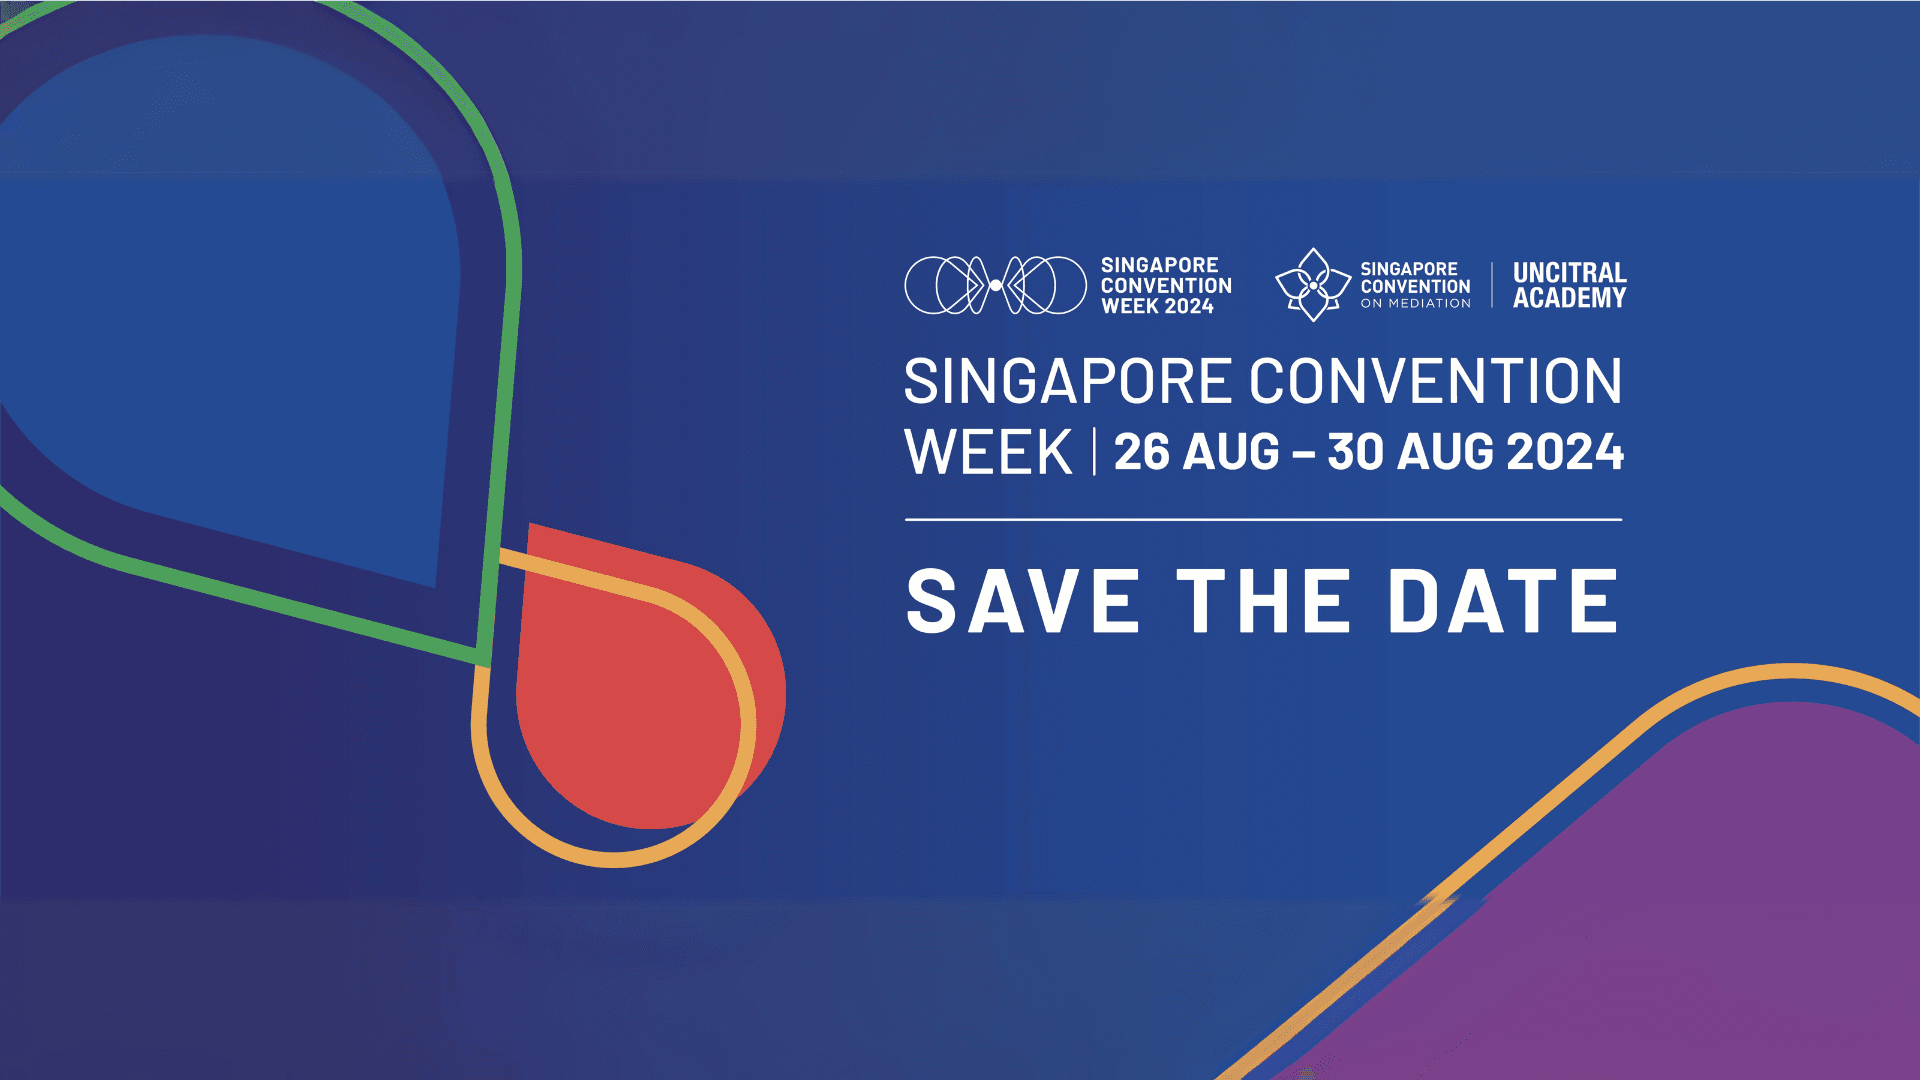 Featured Image for Singapore Convention Week 2024 on 26-30 August 2024